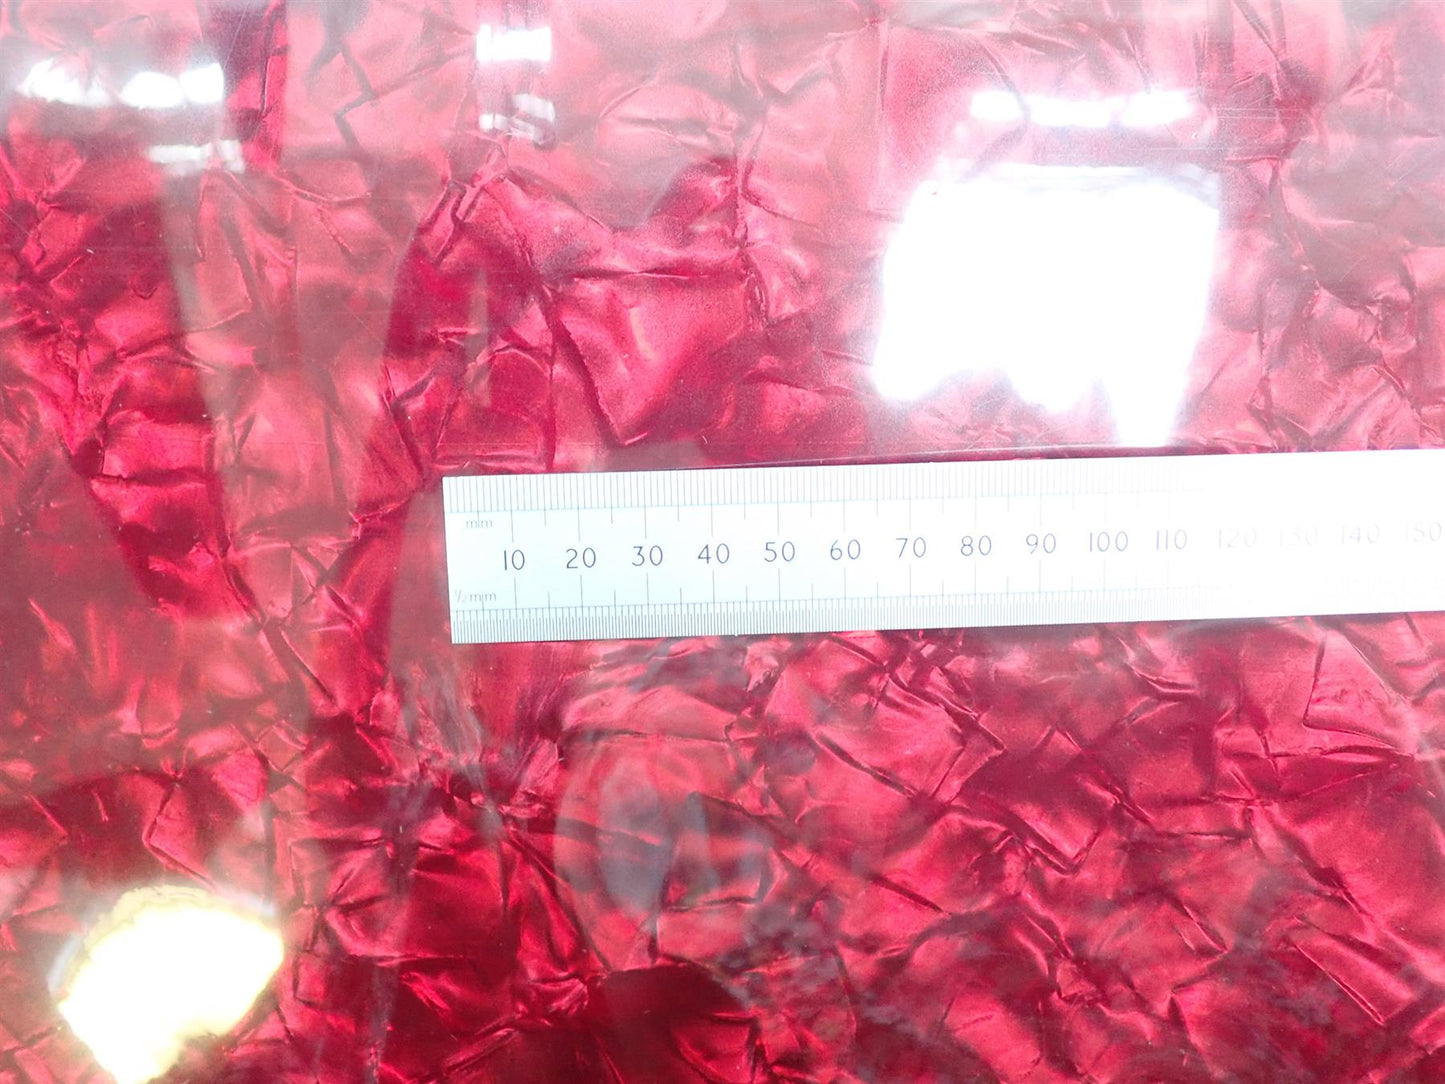 Incudo Red Large Pearloid Celluloid Veneer / Wrap - 1600x700x0.17mm (63x27.56x0.007")